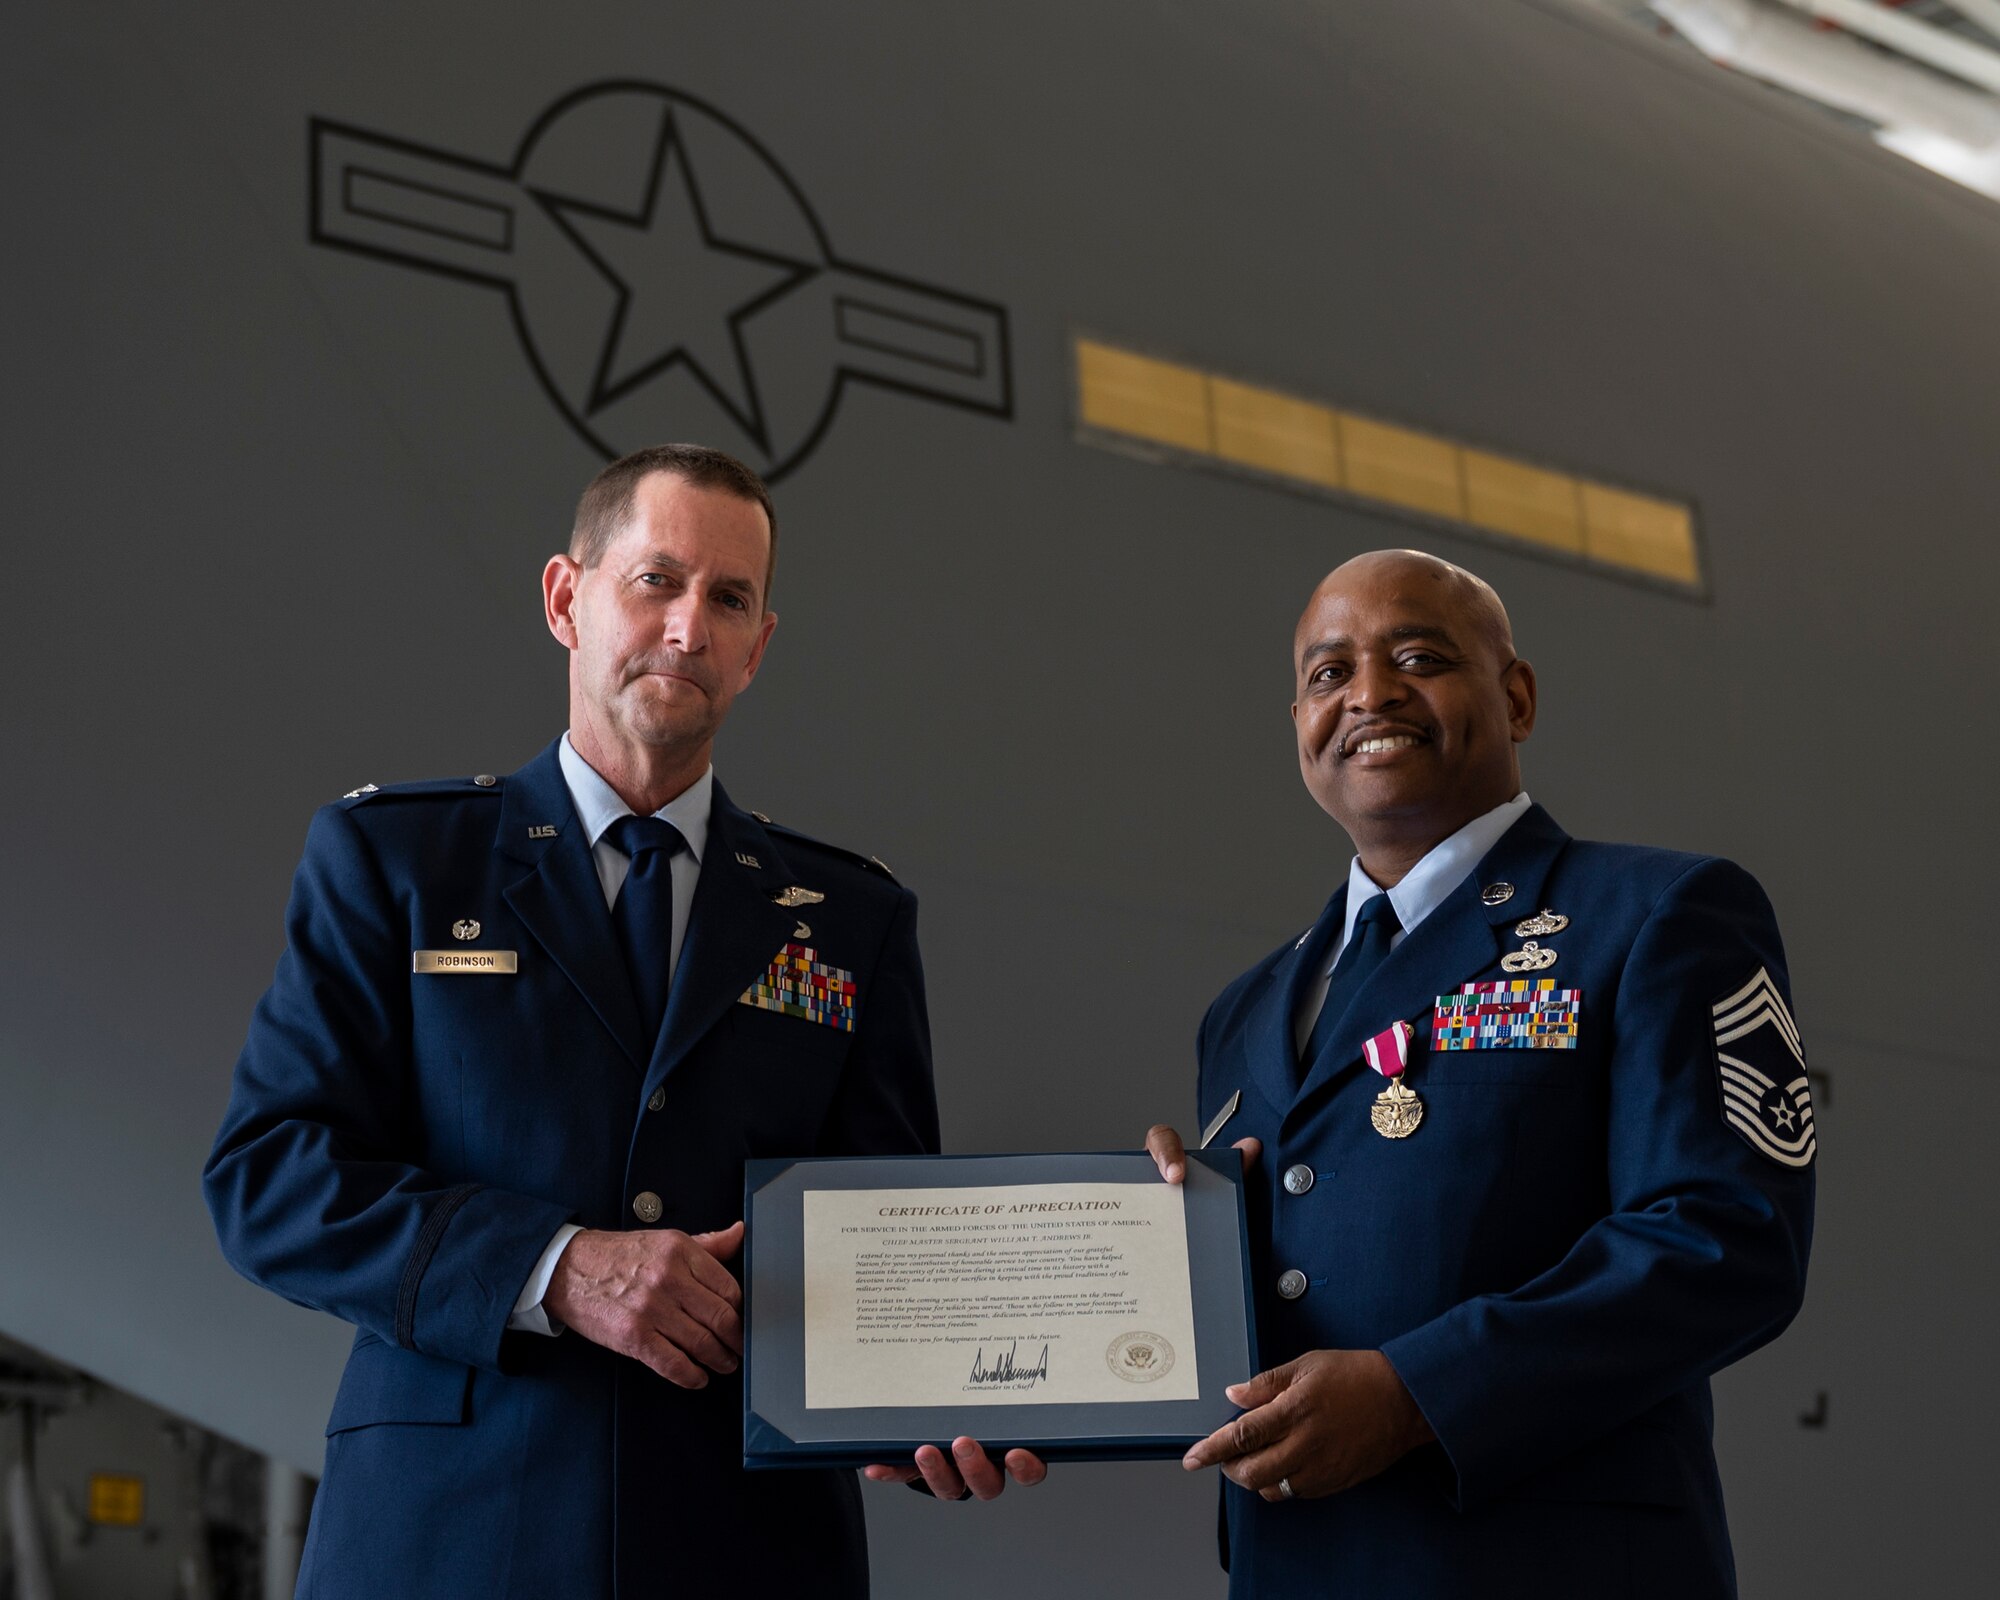 Col. John F. Robinson, 911th Airlift Wing commander, presents a certificate of appreciation for service in the armed forces to Chief Master Sgt. William T. Andrews, 911th Logistics Readiness Squadron superintendent, during a retirement ceremony at the Pittsburgh International Airport Air Reserve Station, Pennsylvania, June 5, 2021.